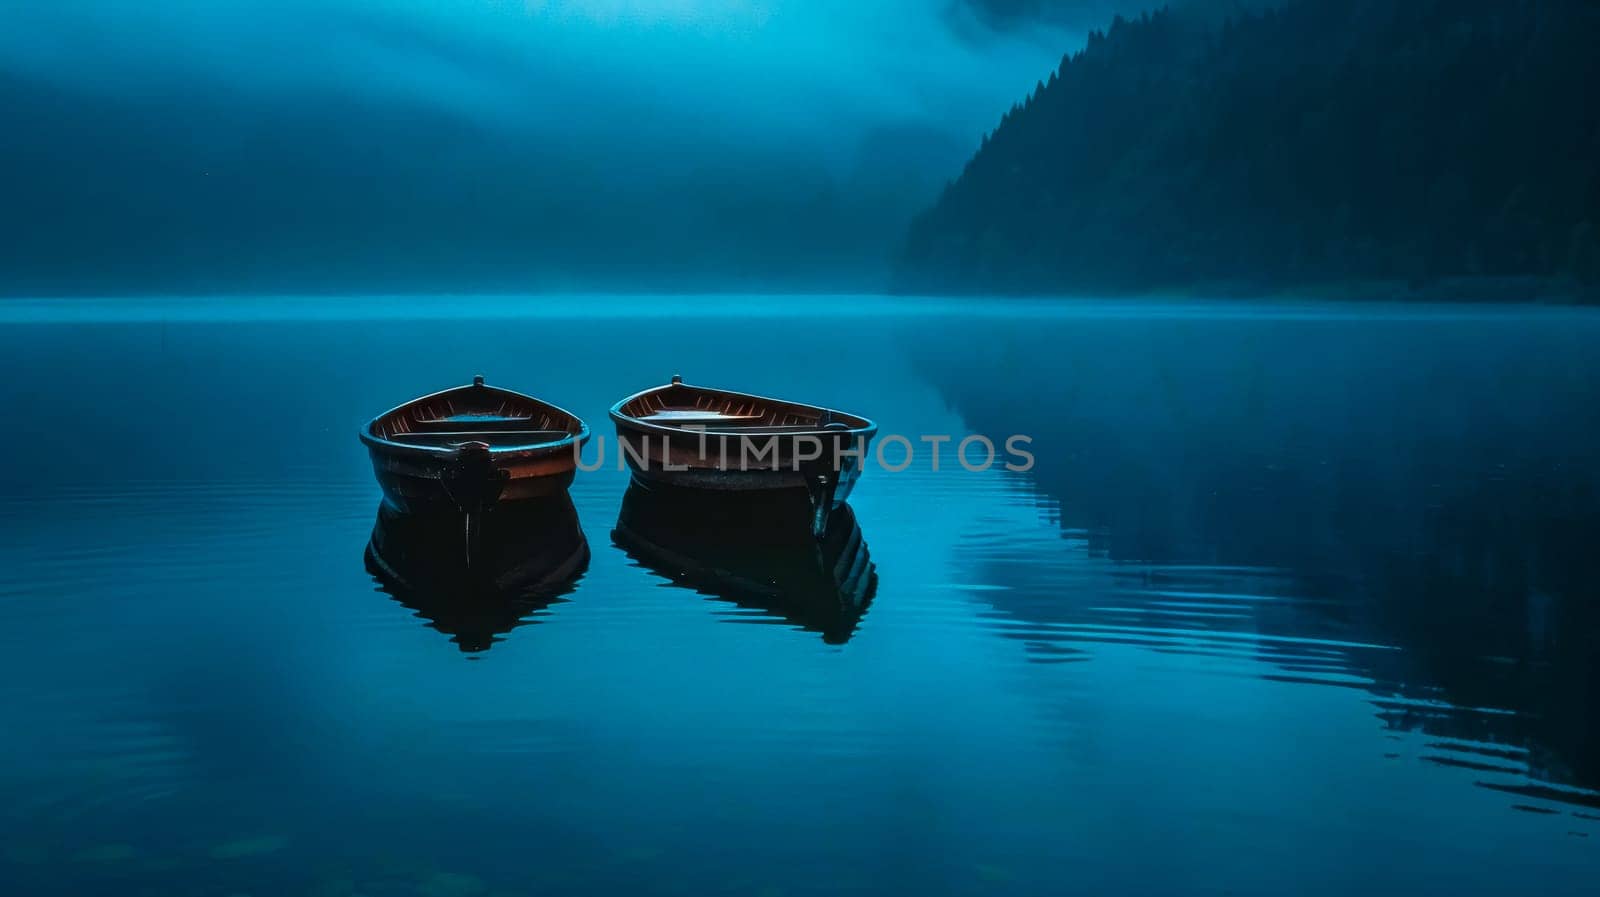 Two boats float peacefully on a calm lake under a dusky blue sky, shrouded in mist